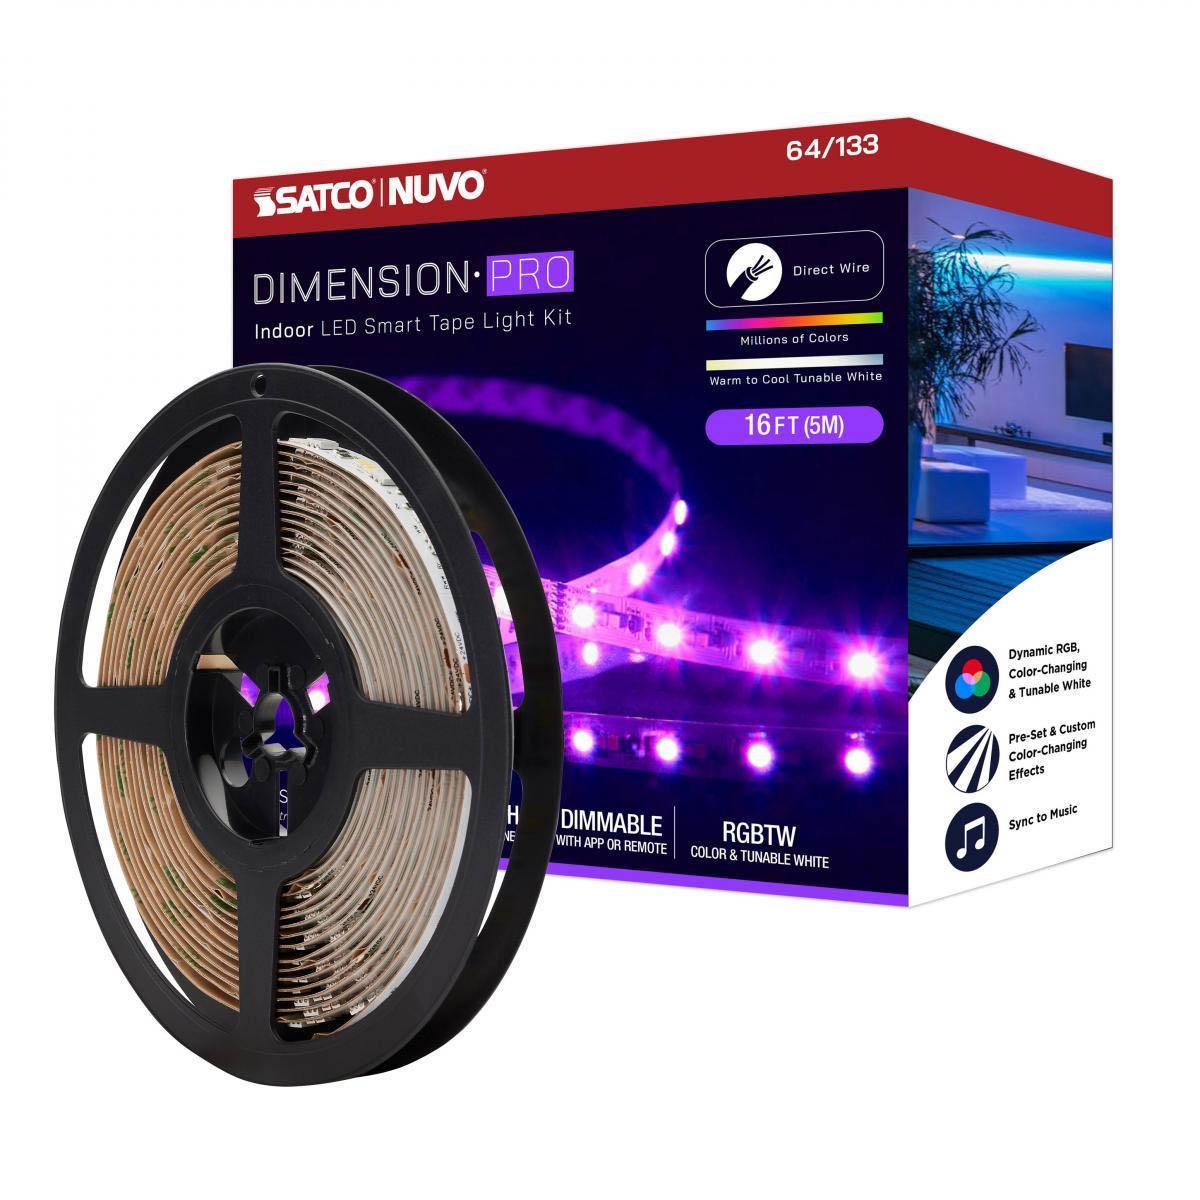 Dimension Pro LED Smart Tape Light Kit with Remote, 16ft Reel, Color Changing RGB and Tunable White, 24V, J-Box Connection